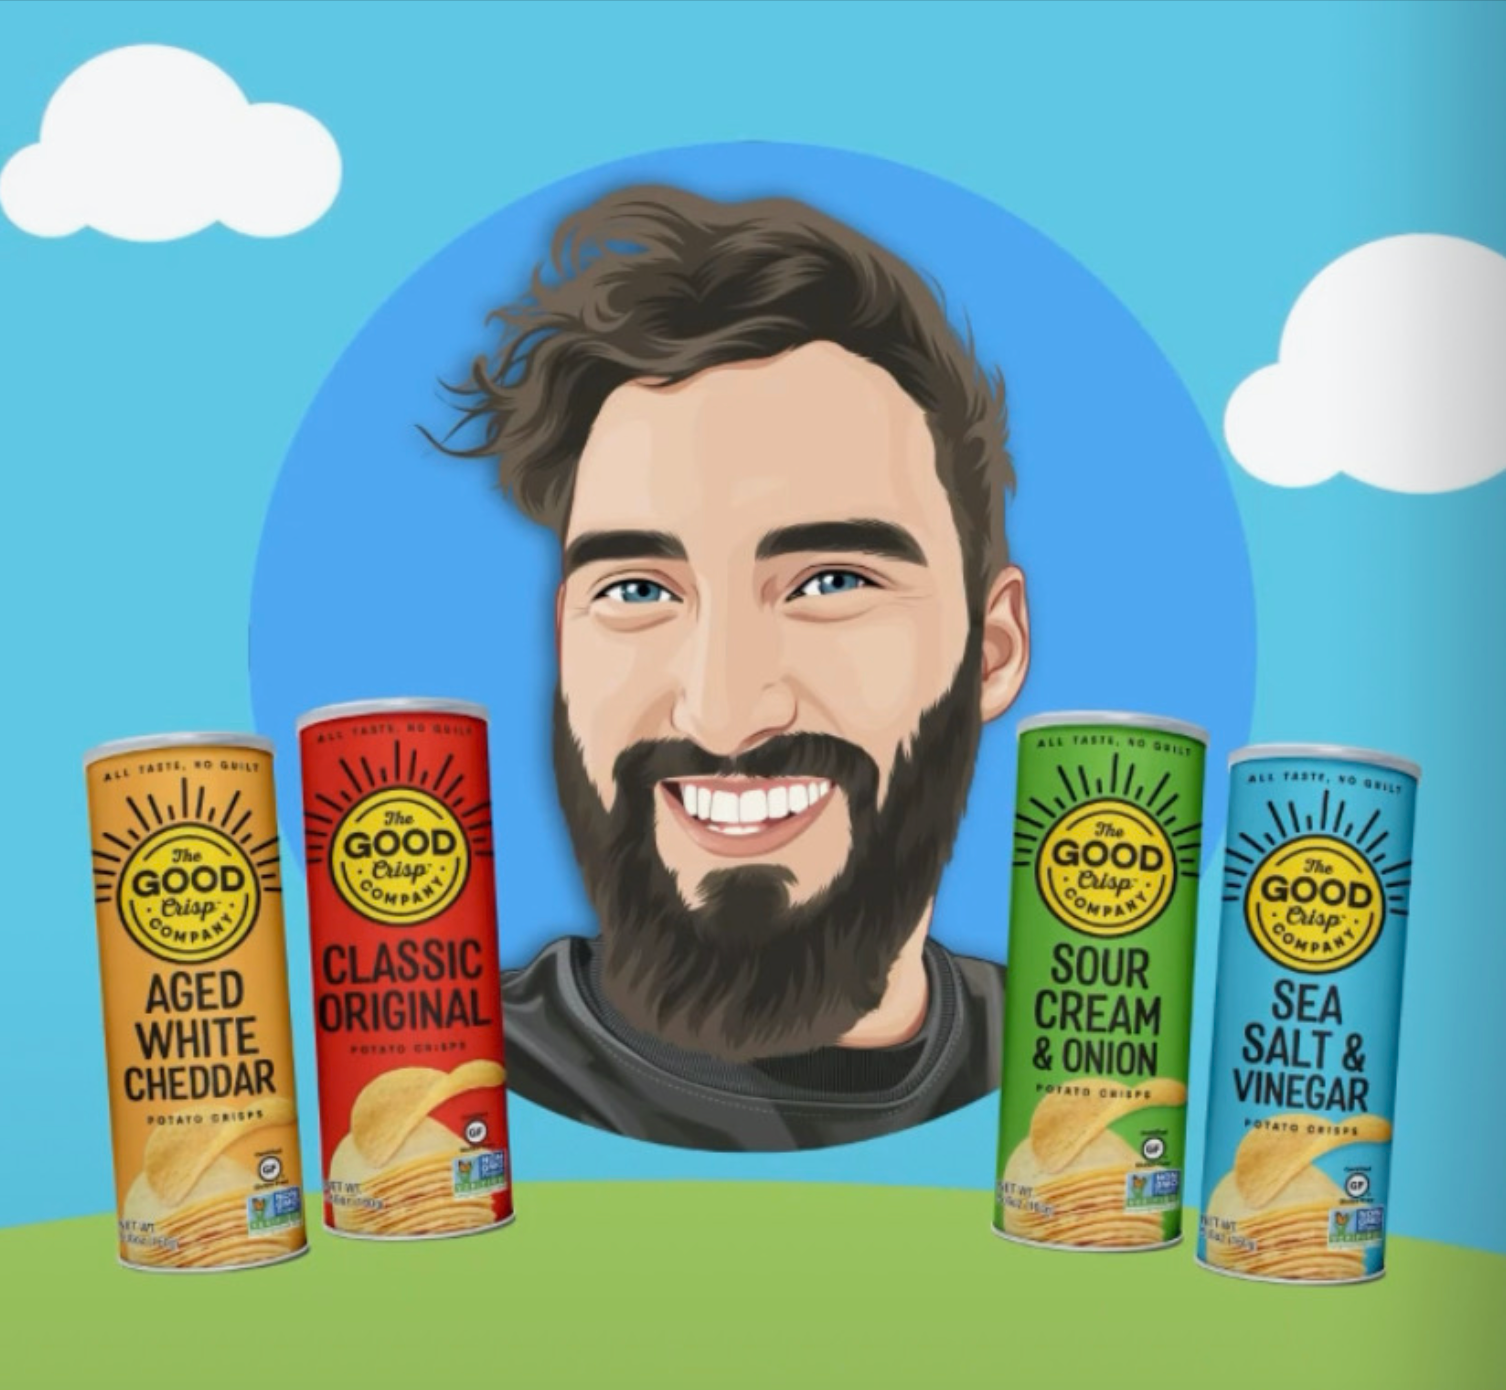 Illustration of Matt's face in the sky, alongside cannisters of Sea Salt & Vinegar, Sour Cream & Onion, Classic Original and Aged White Cheddar chips